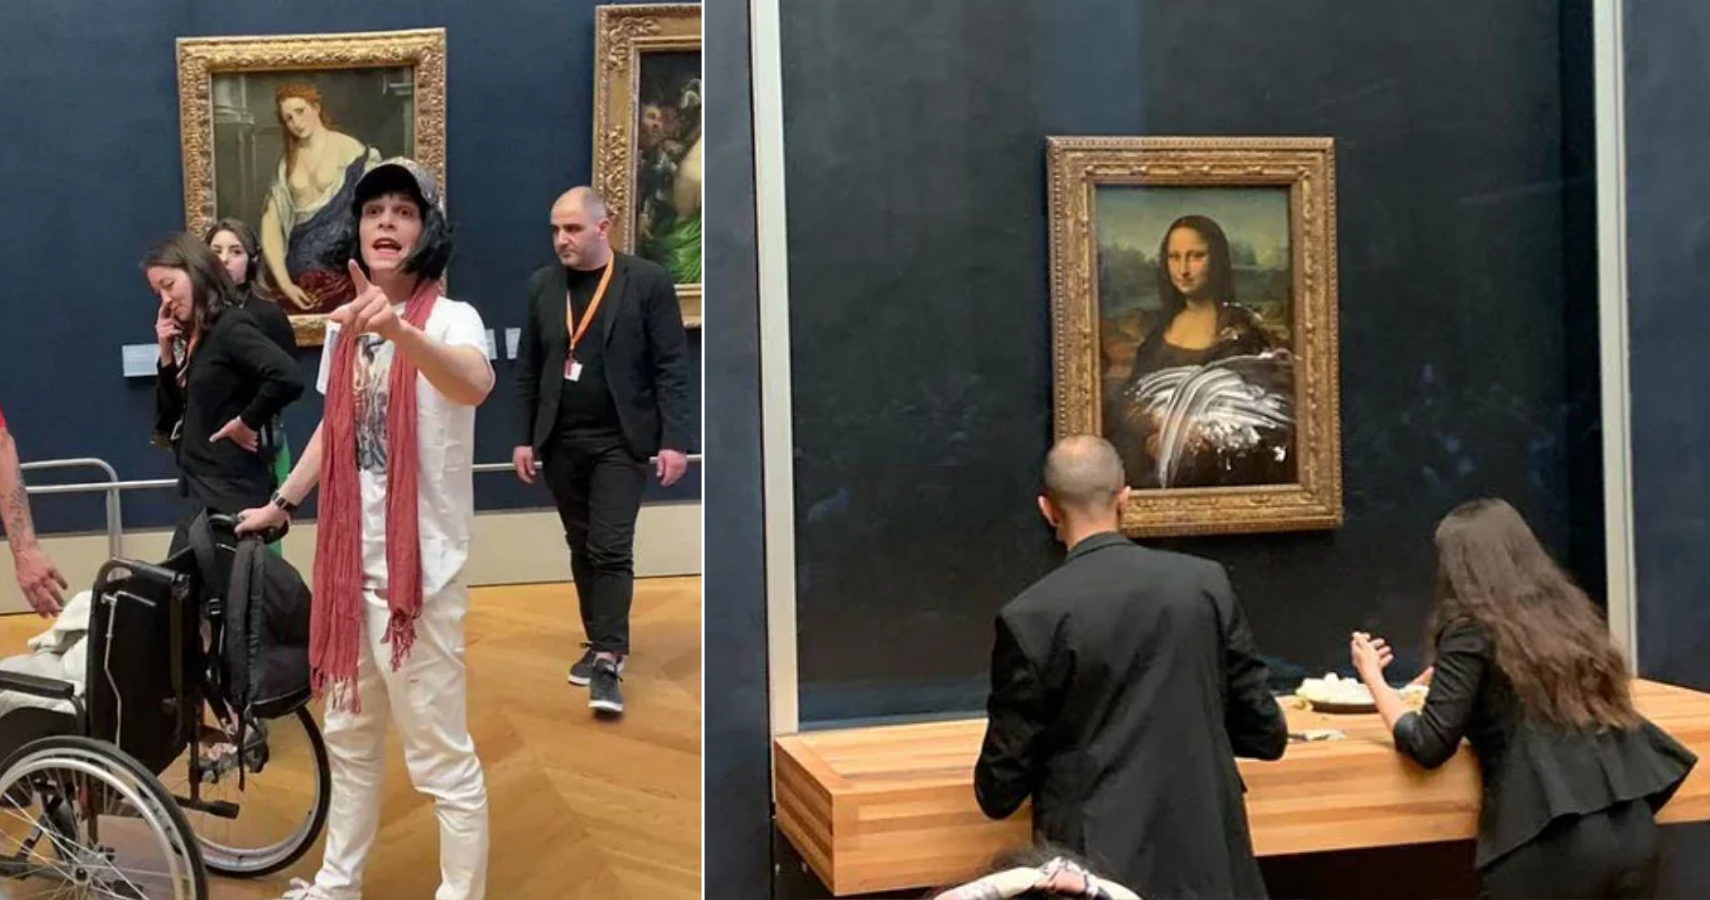 Man Arrested For Throwing Cake on Mona Lisa Painting | Leonardo da Vinci,  wig | The Mona Lisa painting is one of the most famous paintings in the  world. It was painted